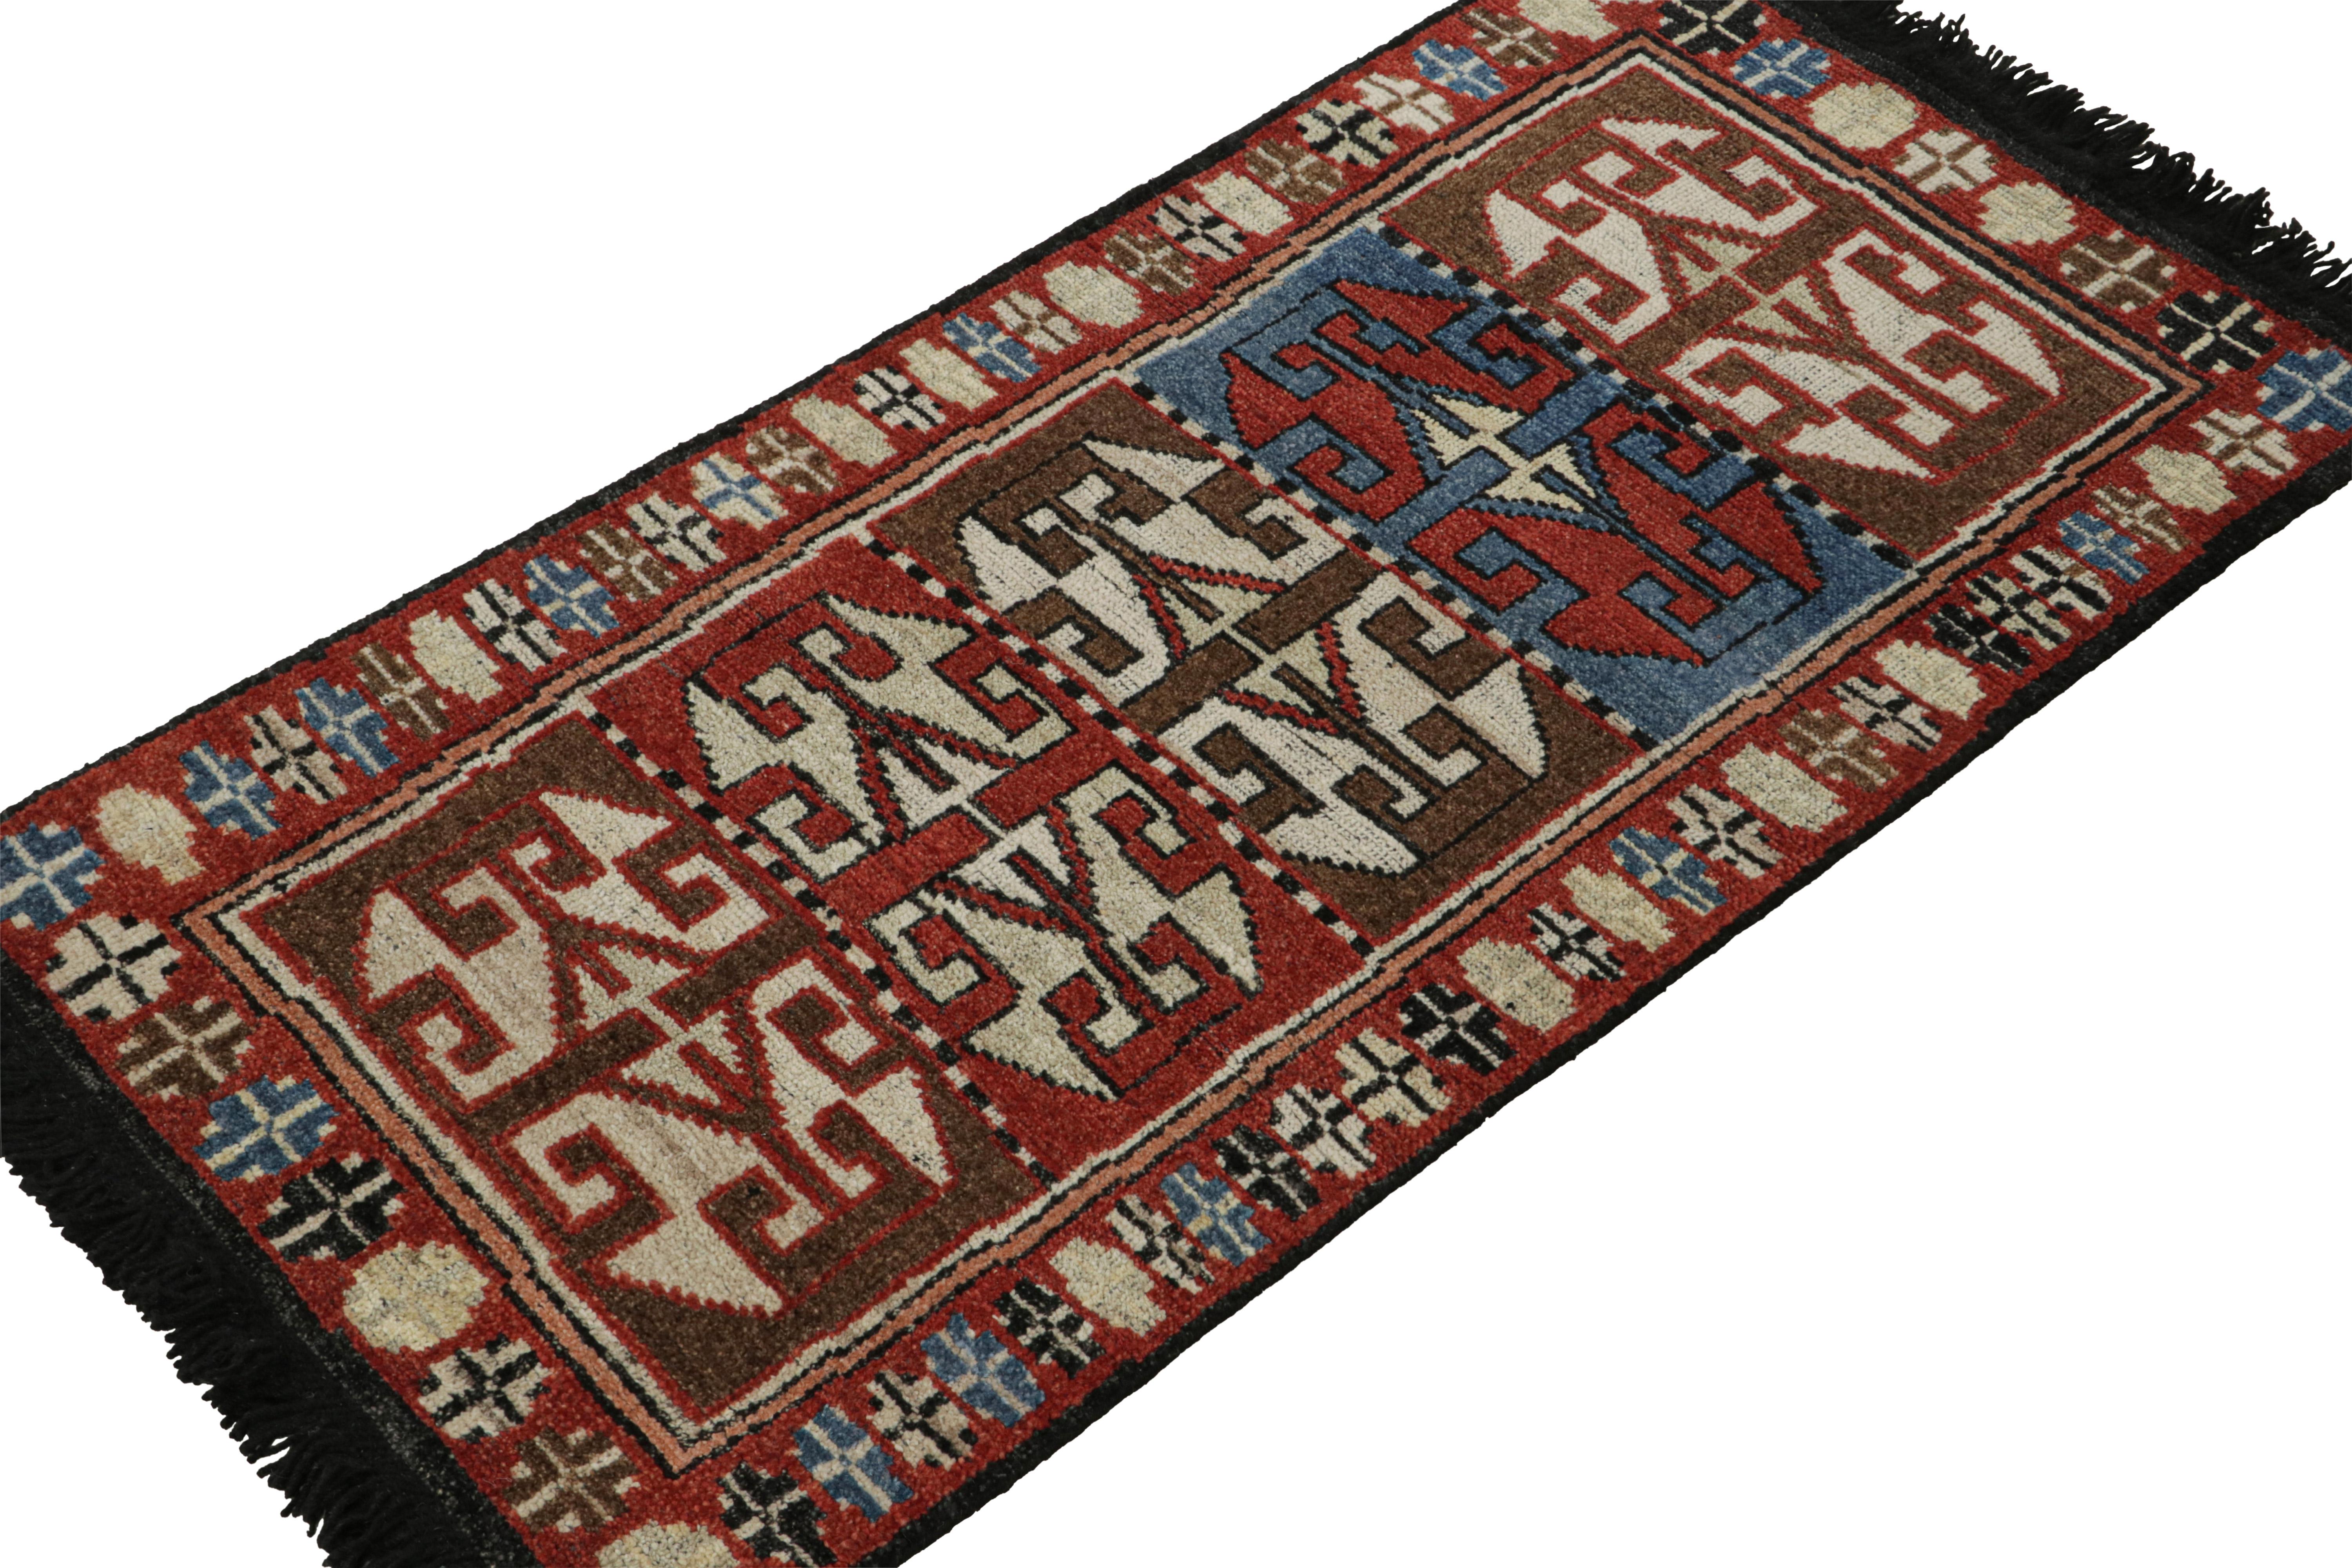 This 2x4 rug is a grand new entry to Rug & Kilim’s custom classics Burano collection. Hand-knotted in wool.

On the Design: 

This rug features geometric patterns from primitivist, nomadic motifs in rich tones of red, blue & brown. Inspired by